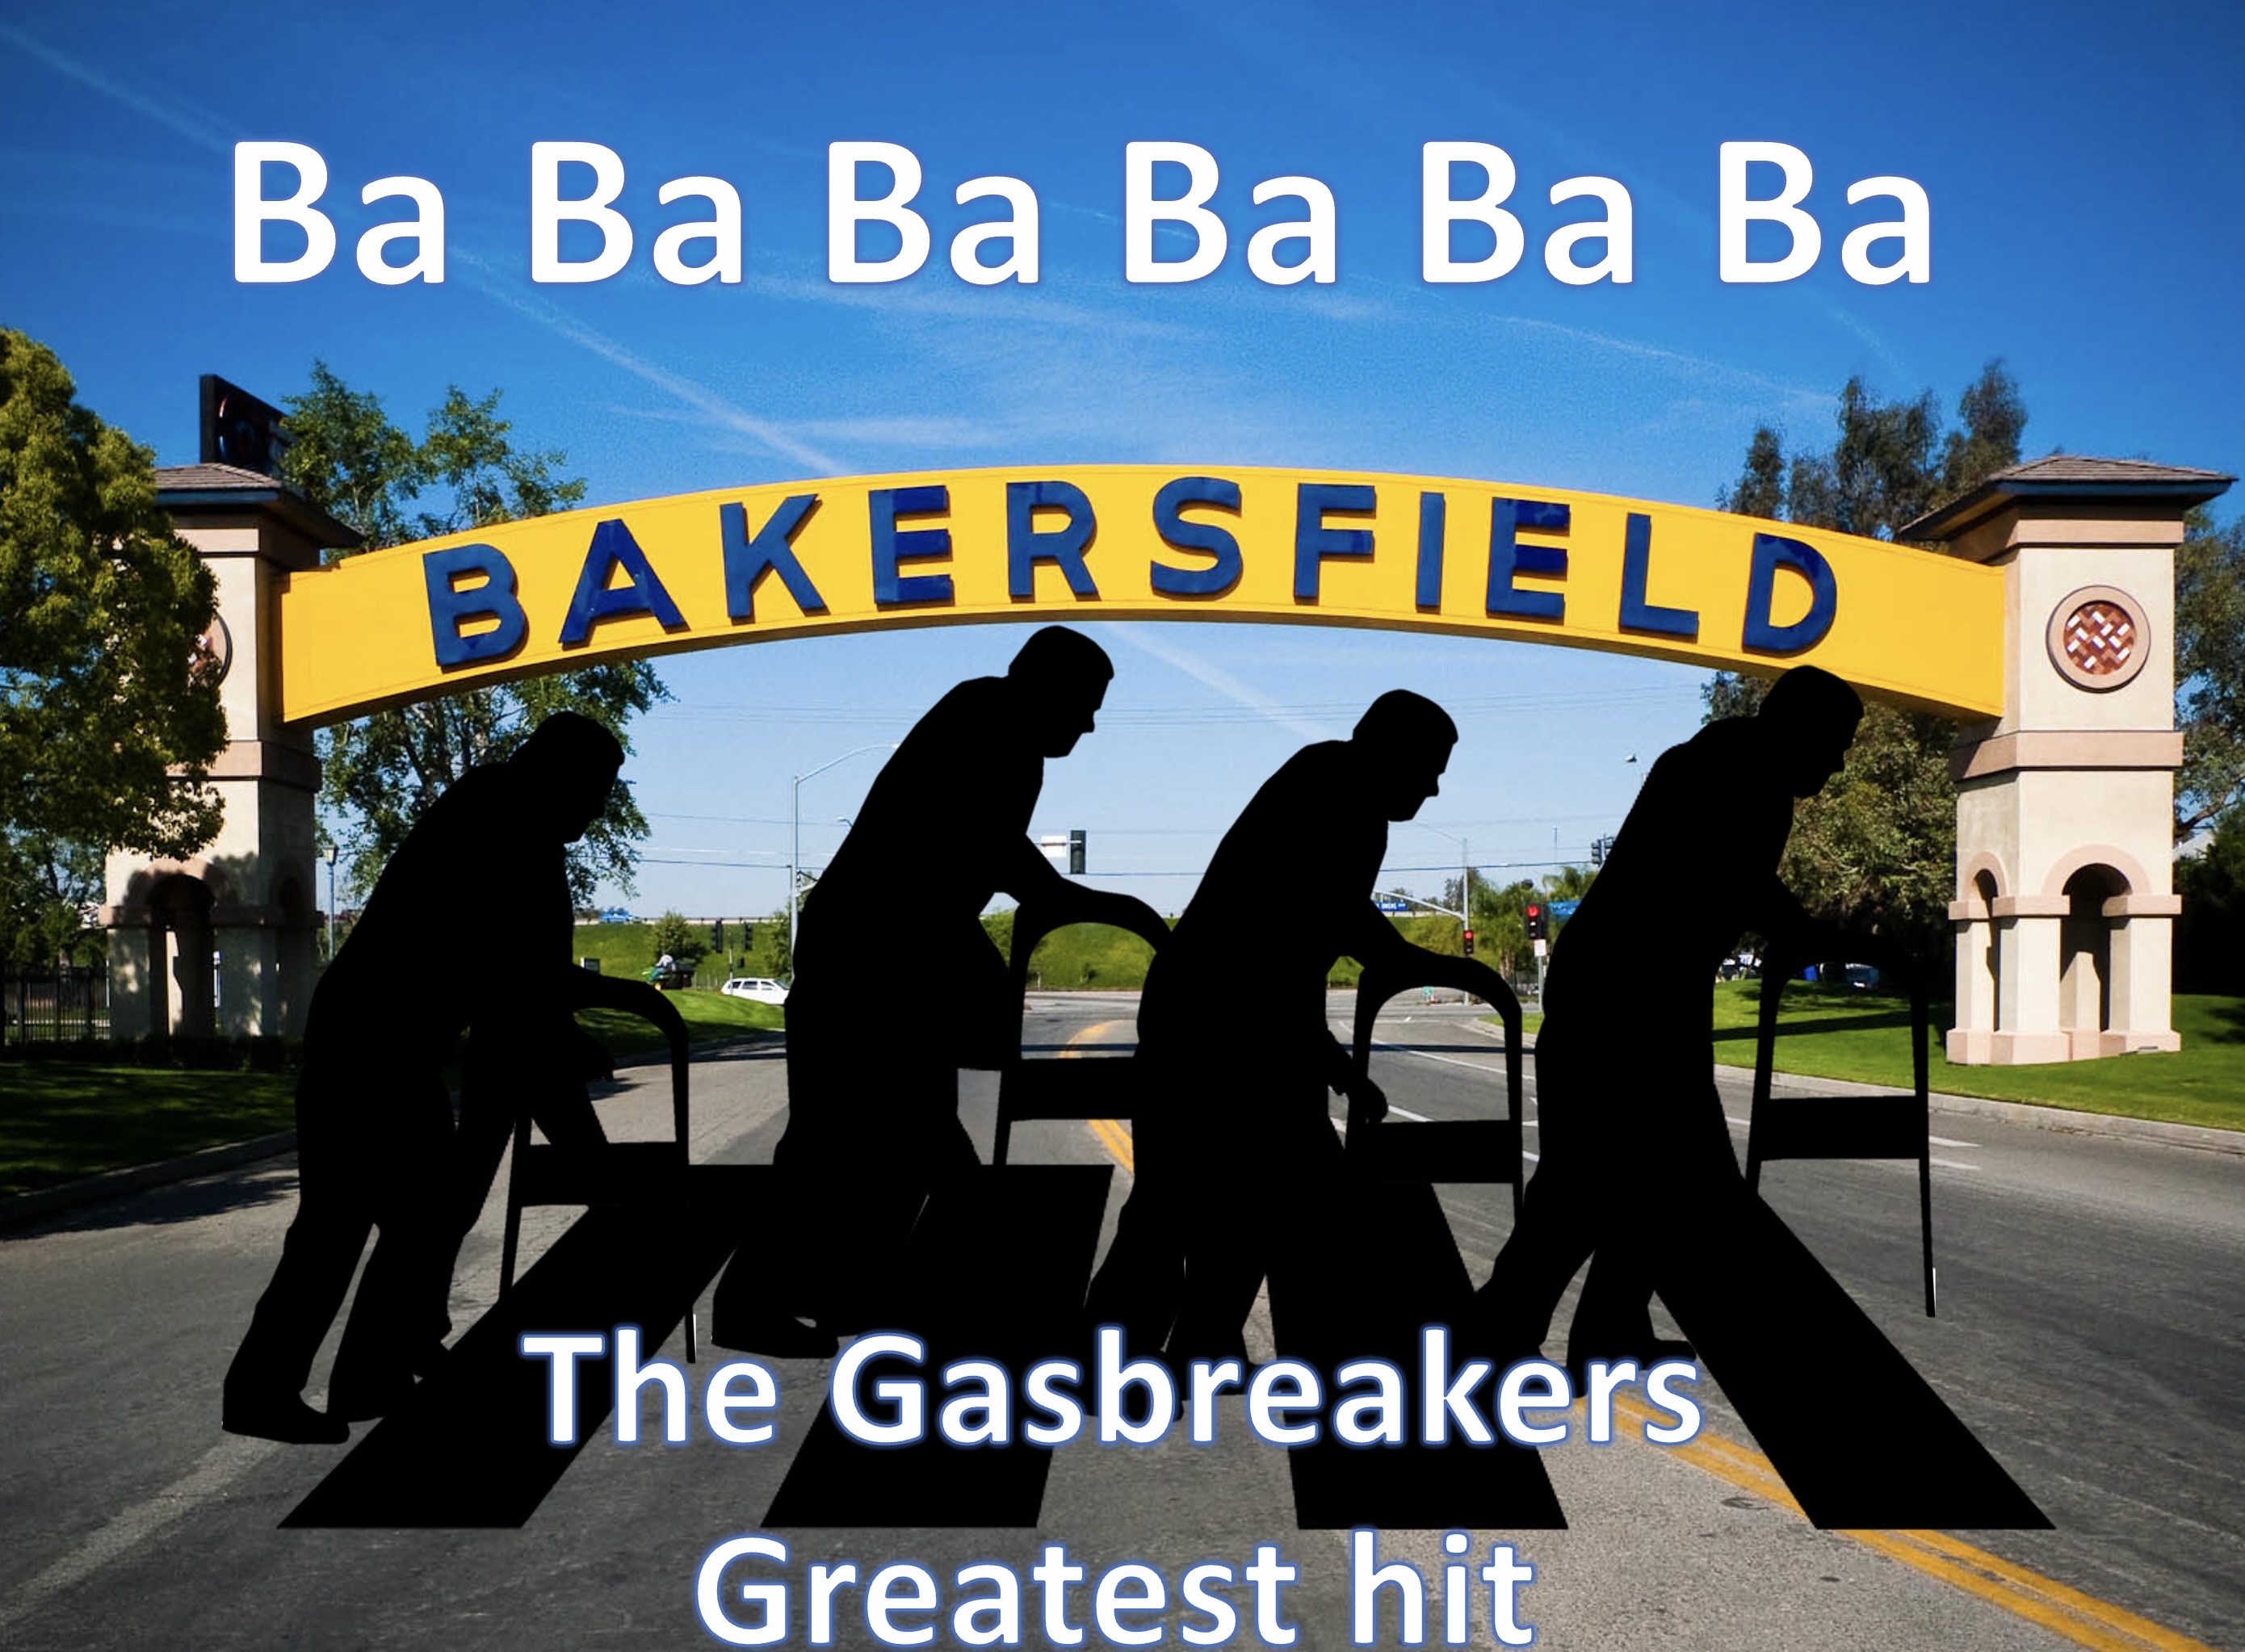 Long-Lost Song Released About Bakersfield by The Gasbreakers